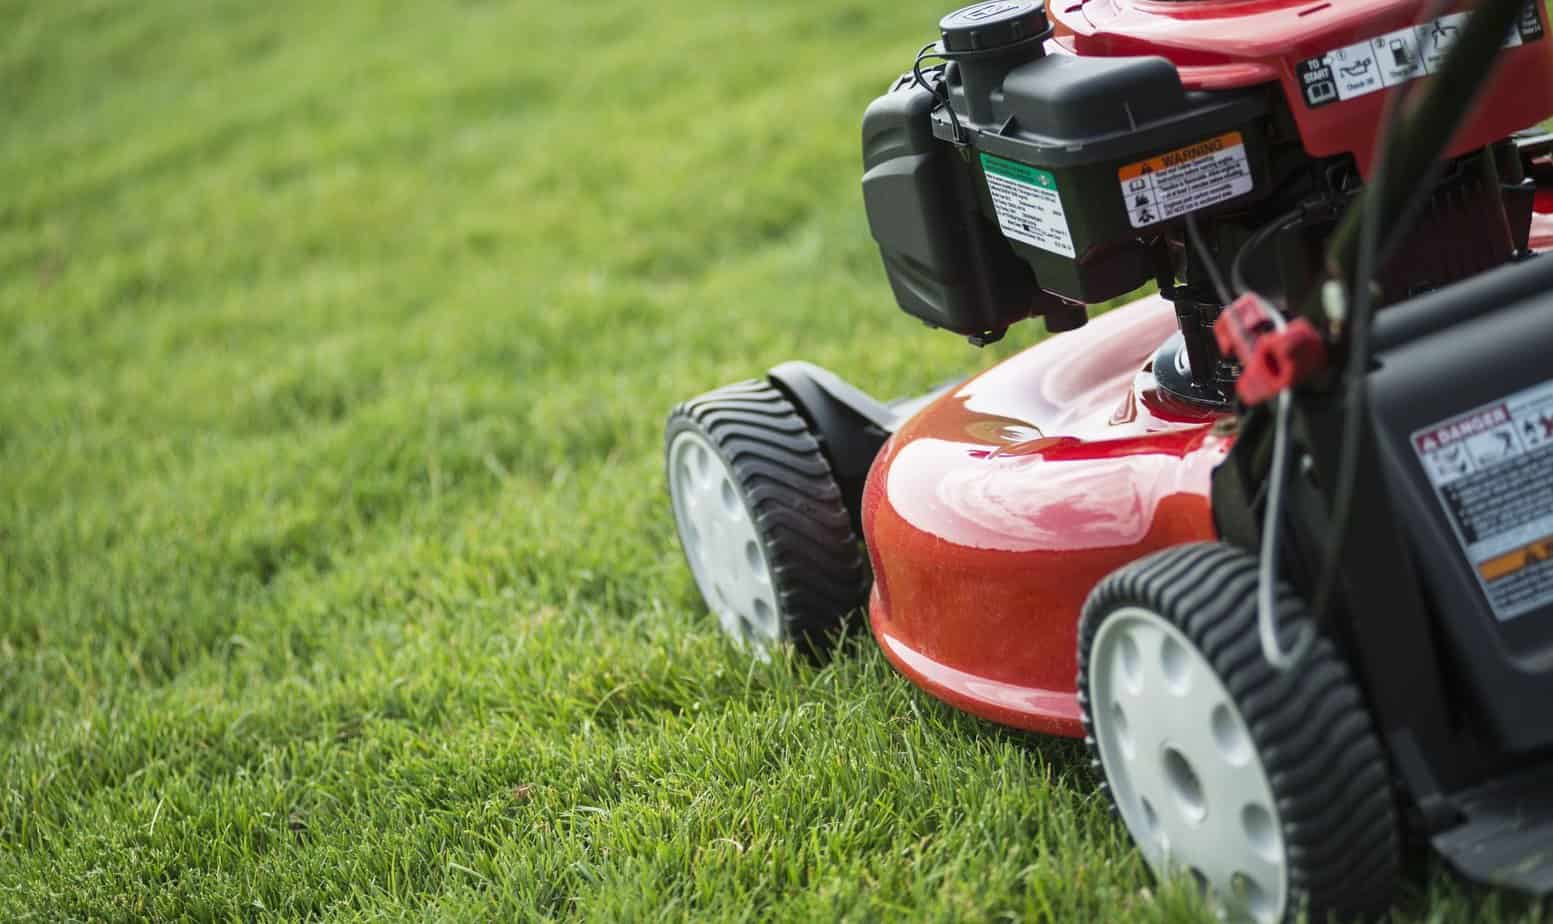 What does a riding lawn mower cost